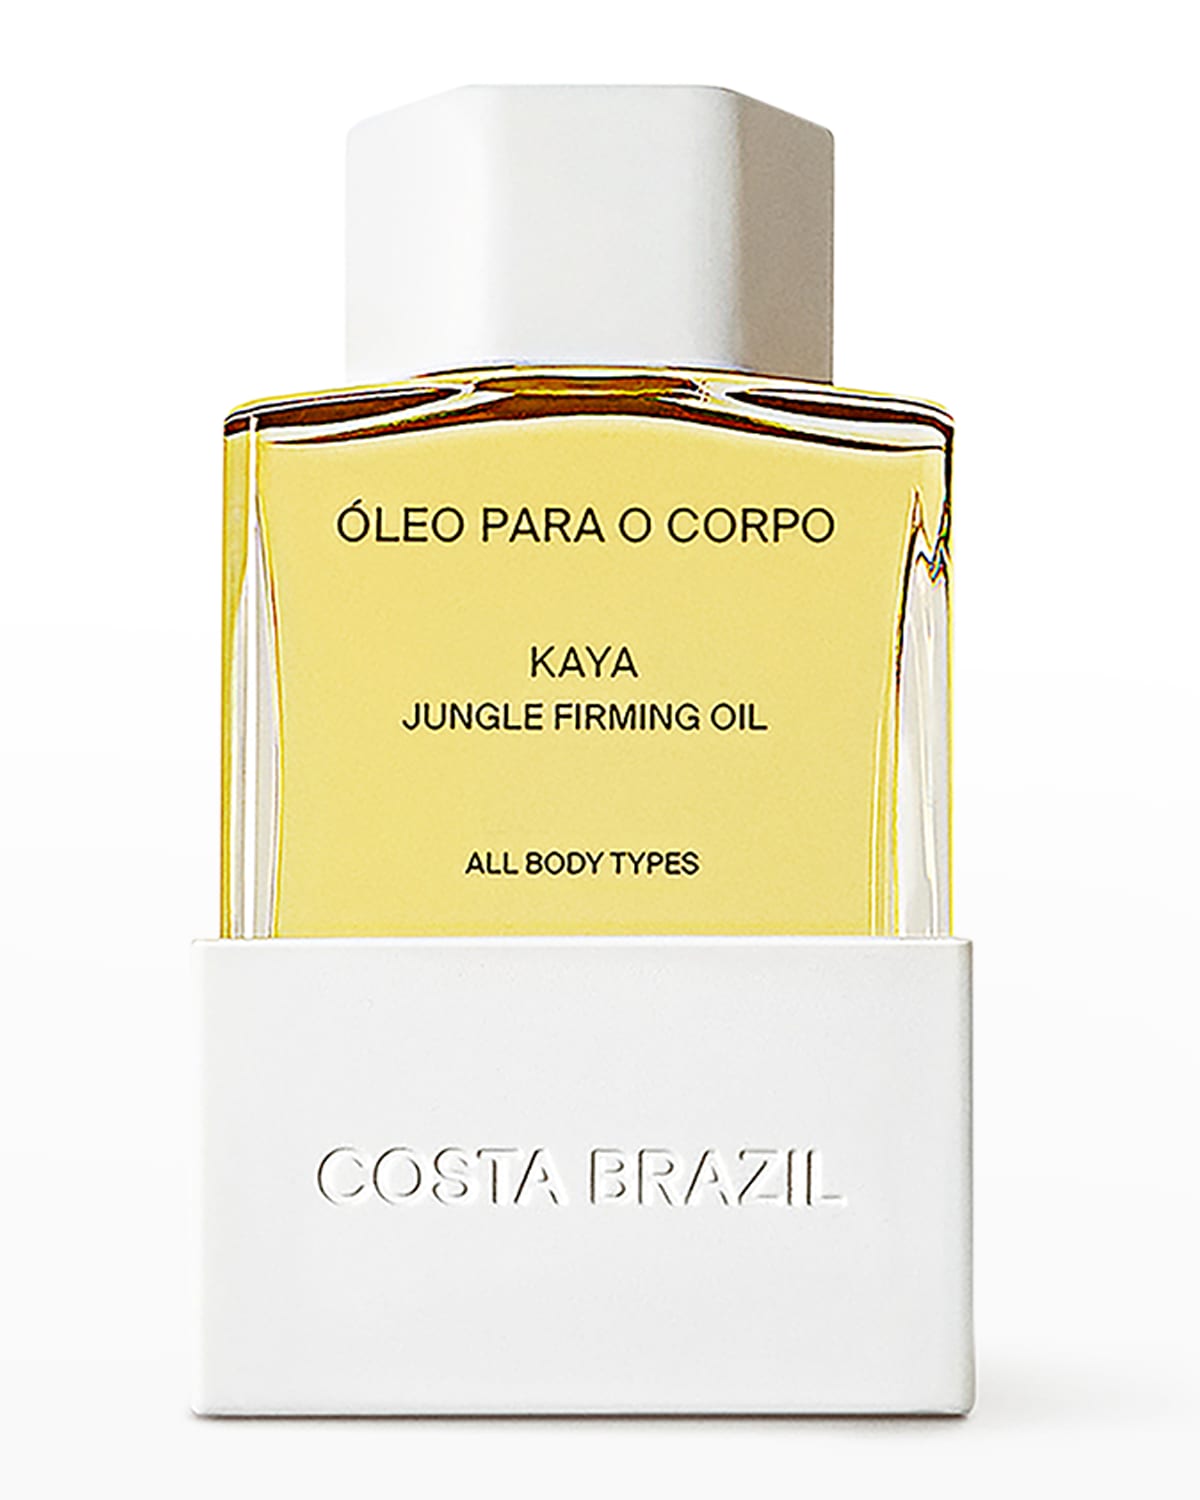 Costa Brazil Oleo Para o Corpo Kaya Jungle Firming Oil, Yours with any $200 Costa Brazil Purchase